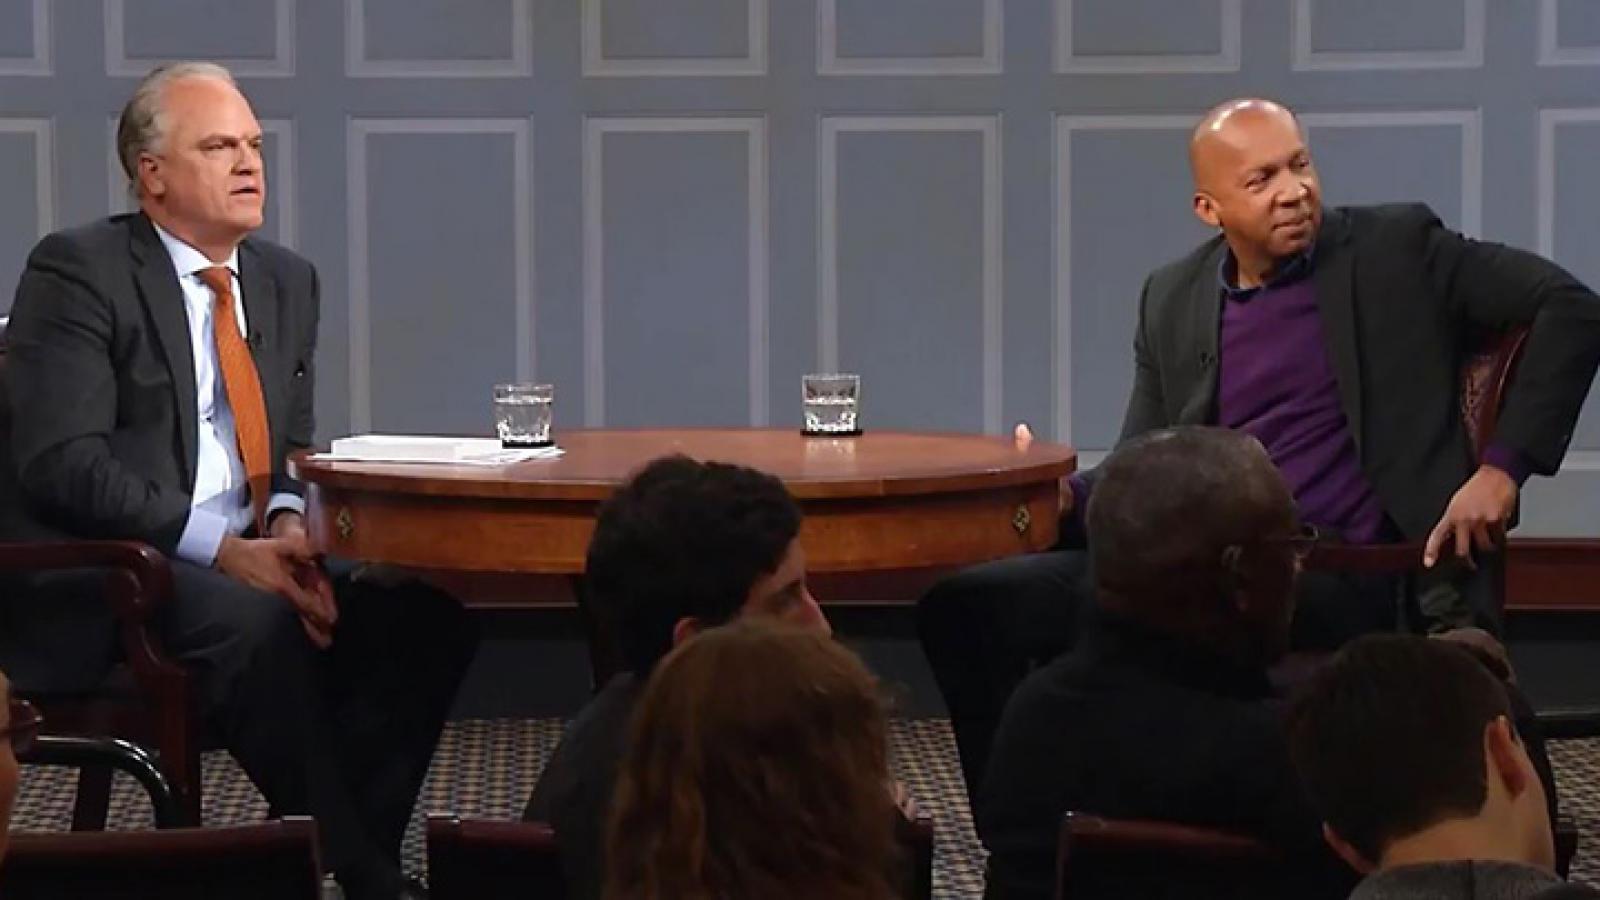 Civil rights lawyer Bryan Stevenson returns to discuss the crisis in and possible solutions for criminal justice